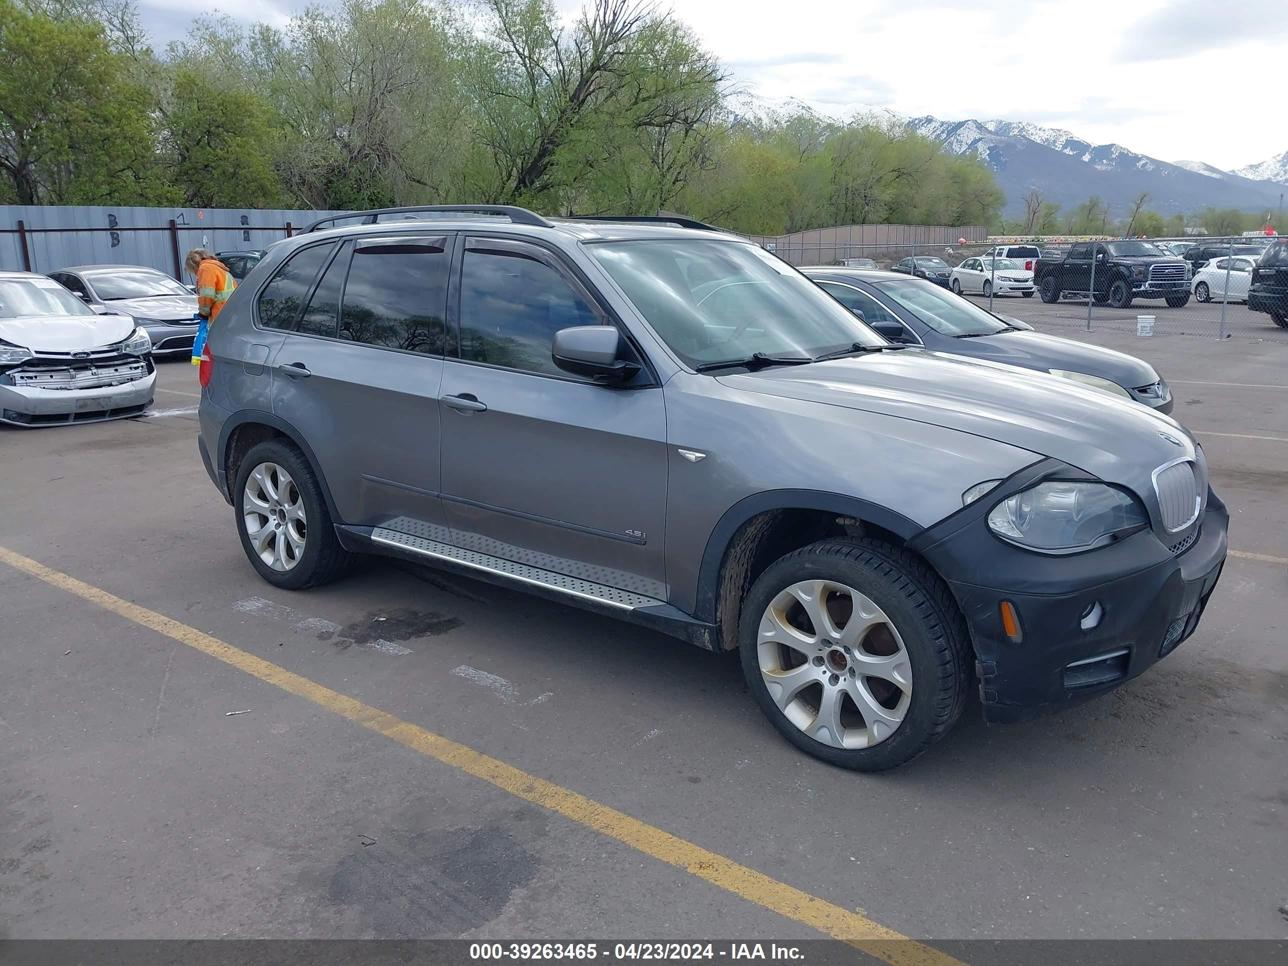 vin: 4USFE83547LY65980 4USFE83547LY65980 2007 bmw x5 4800 for Sale in 84401, 1800 South 1100 West, Ogden, Utah, USA